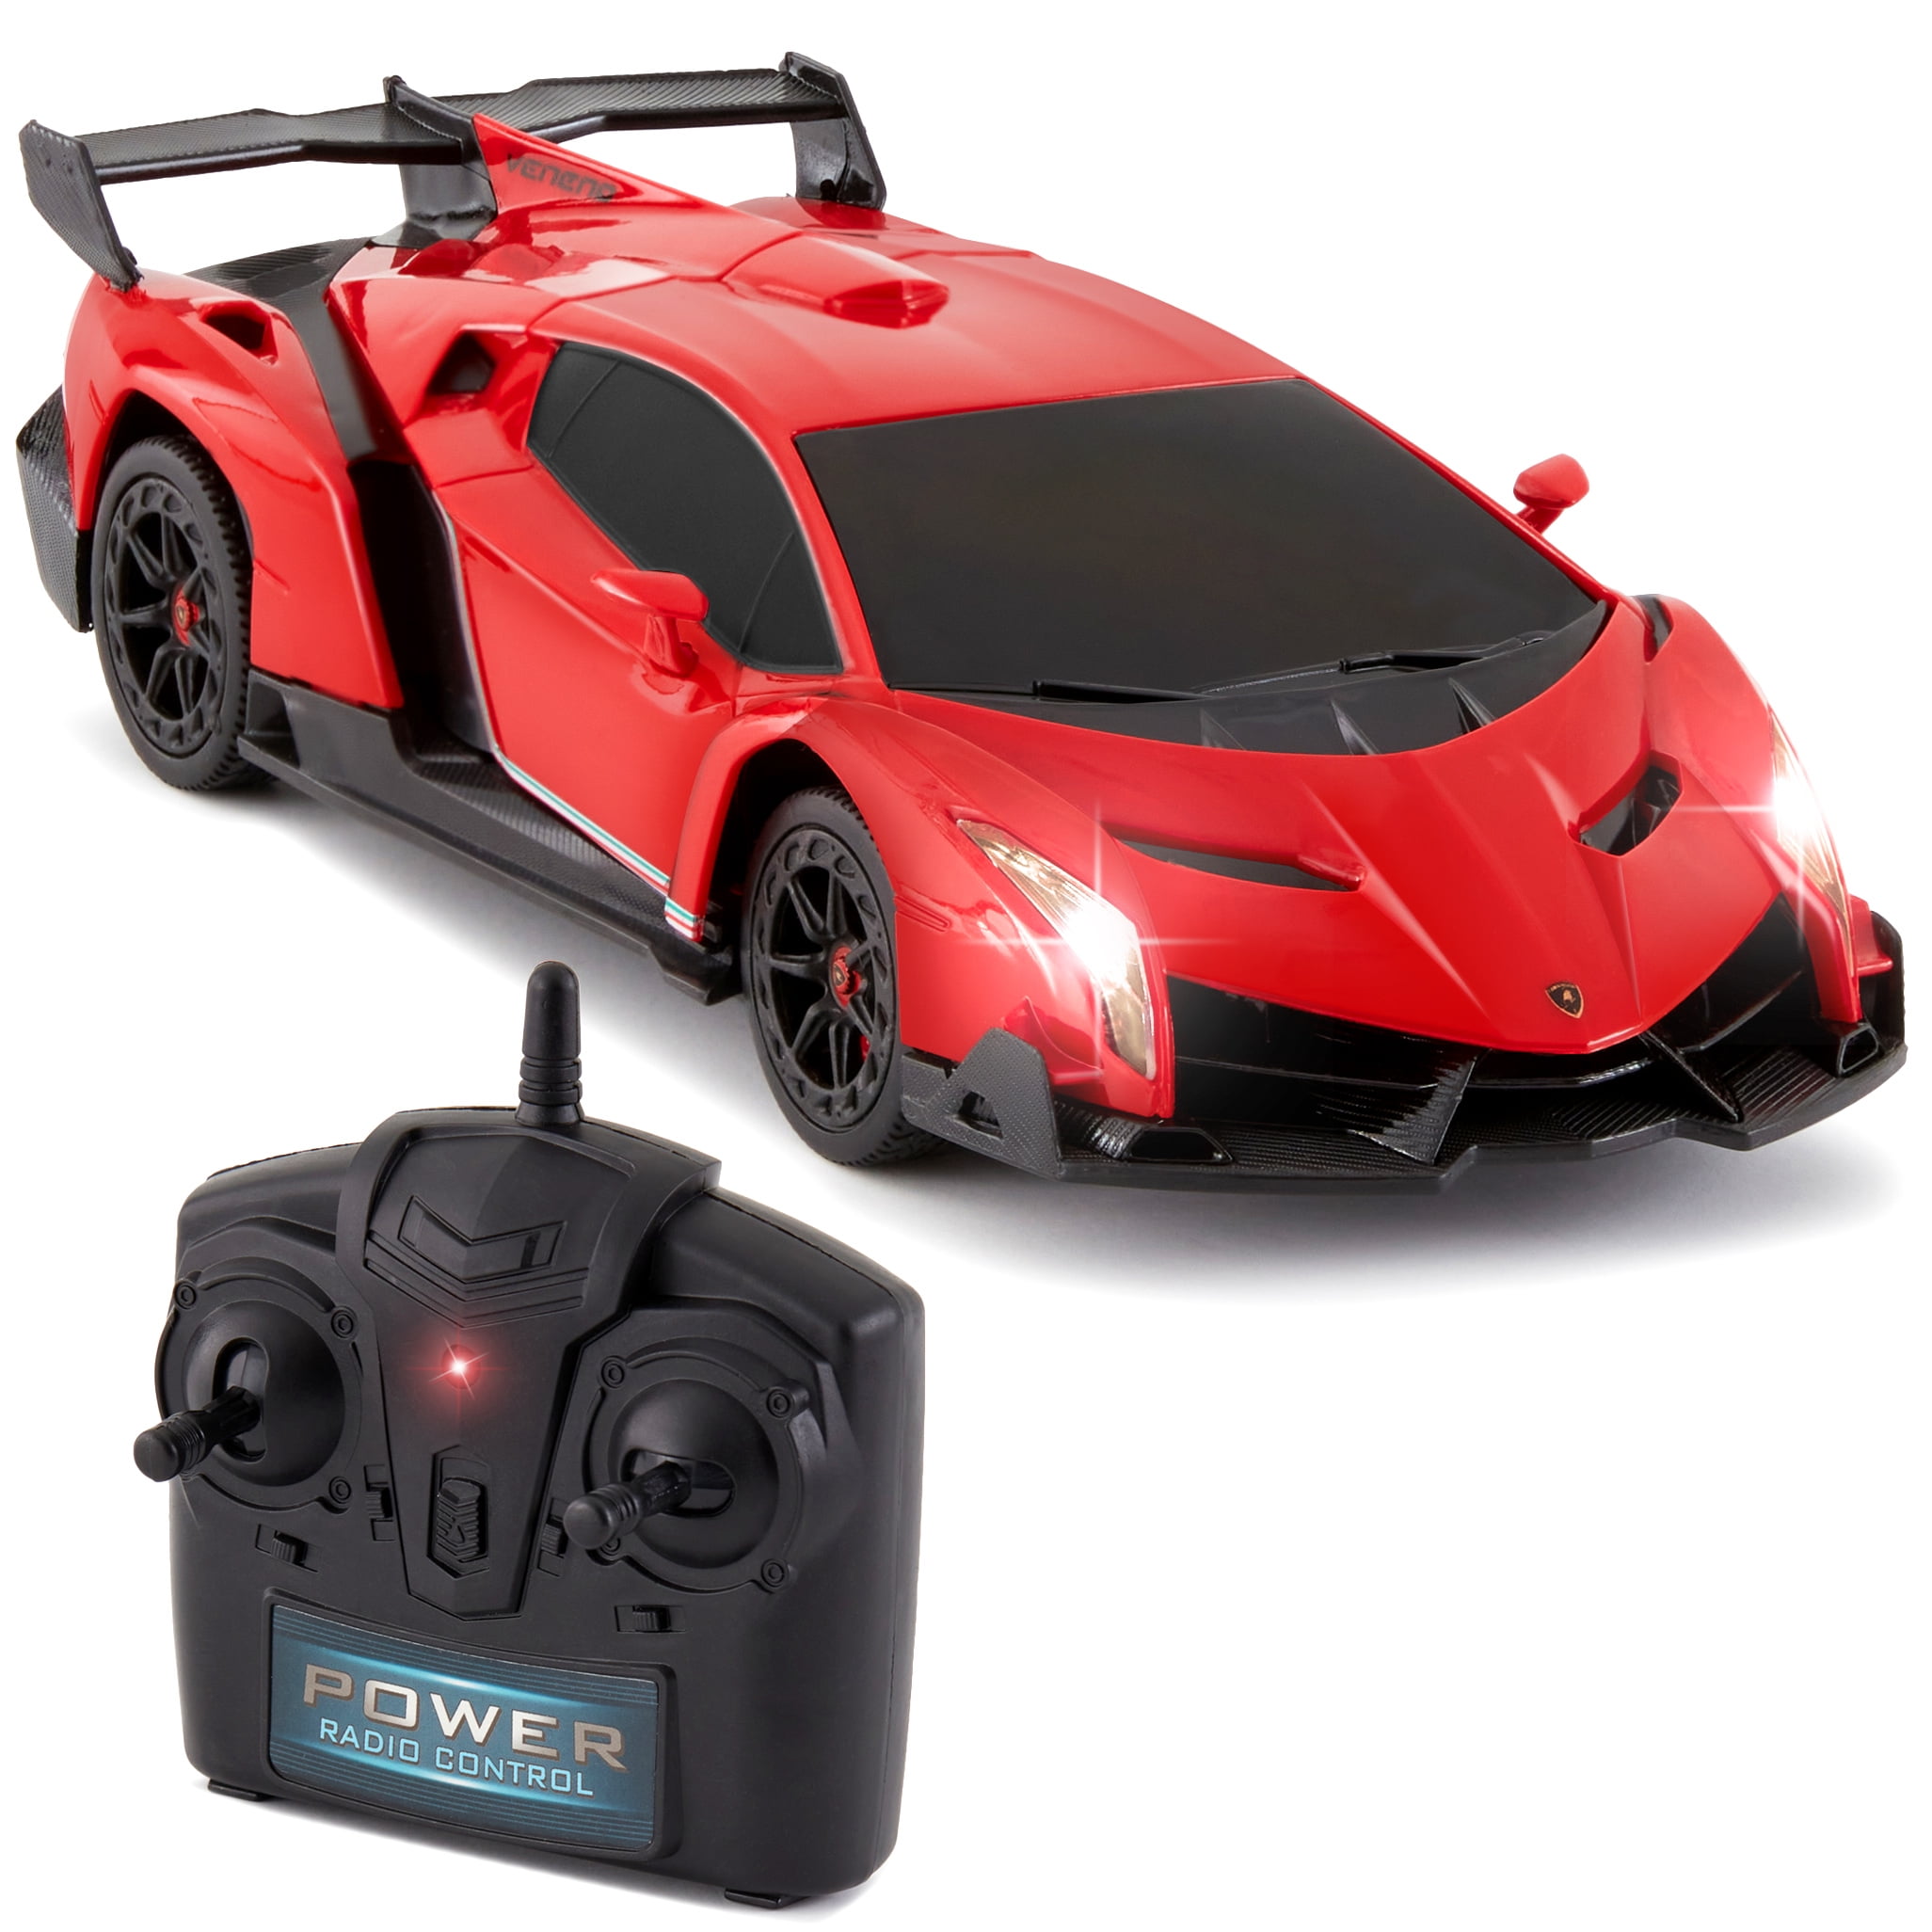 SALE PRICE New Official Replica Remote Control Car Toy Gift 1:14 or 1:24 Scale 